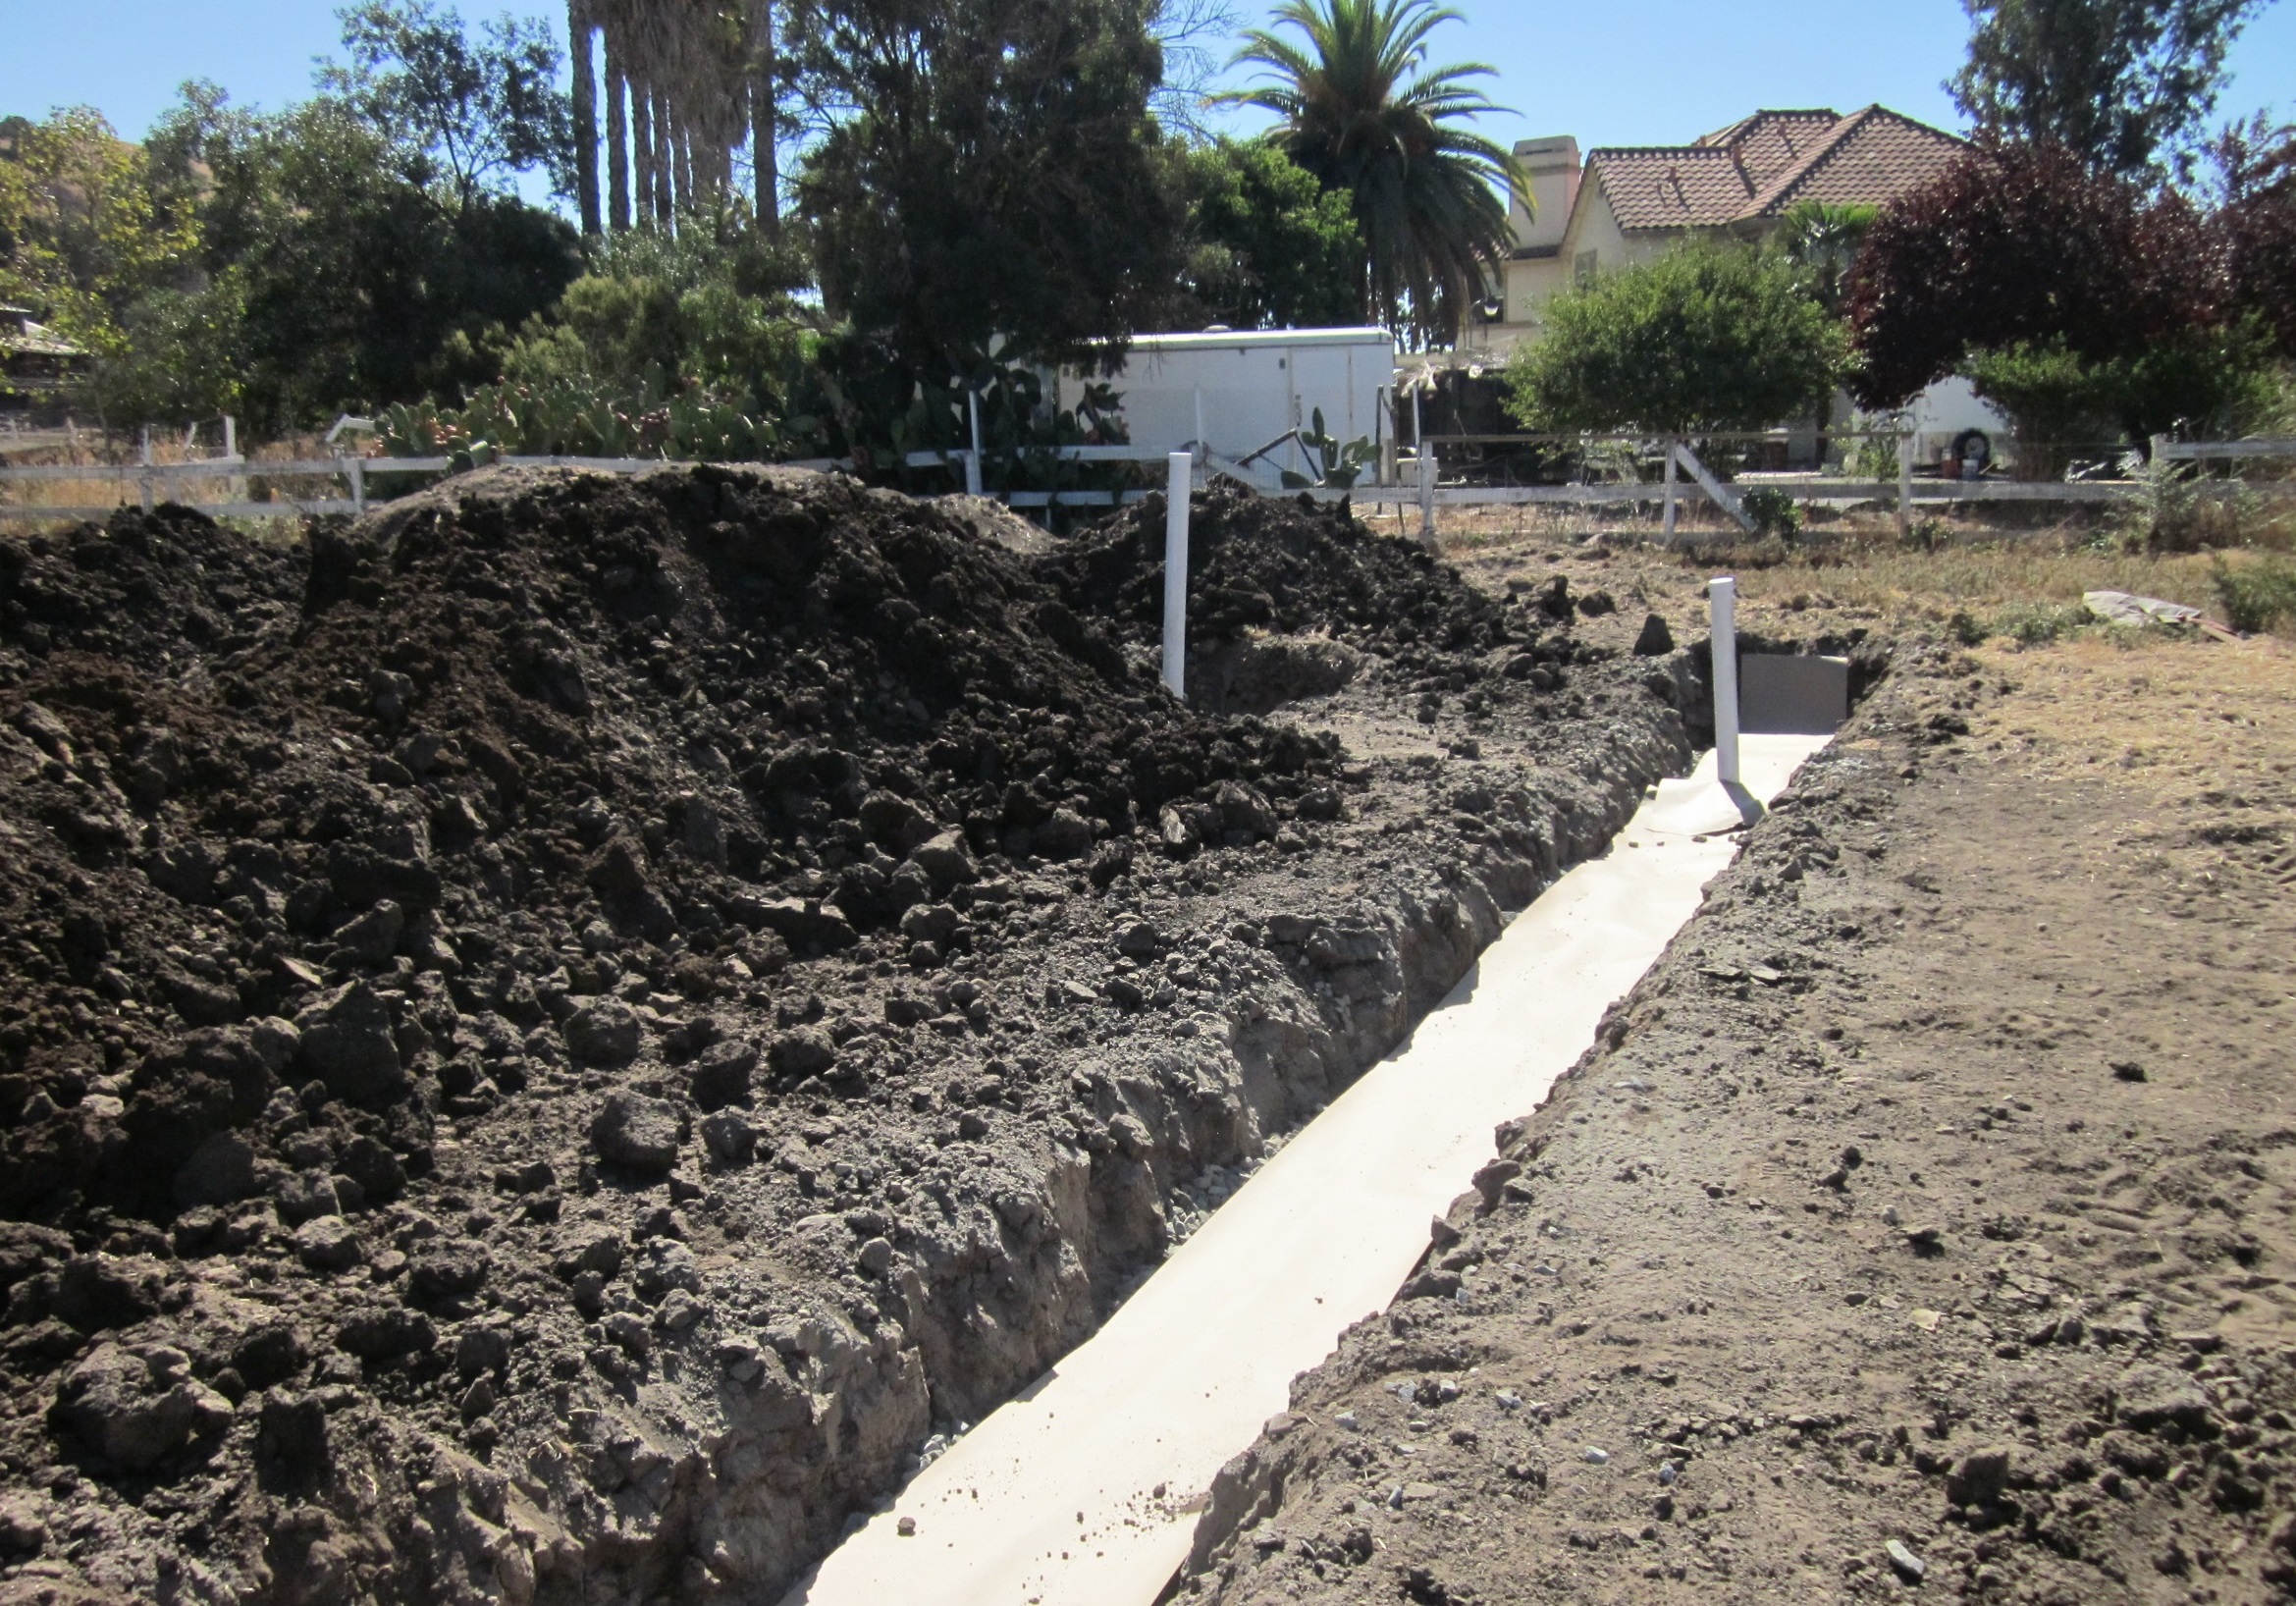 Image of a property with a septic treatment system being installed in the backyard.